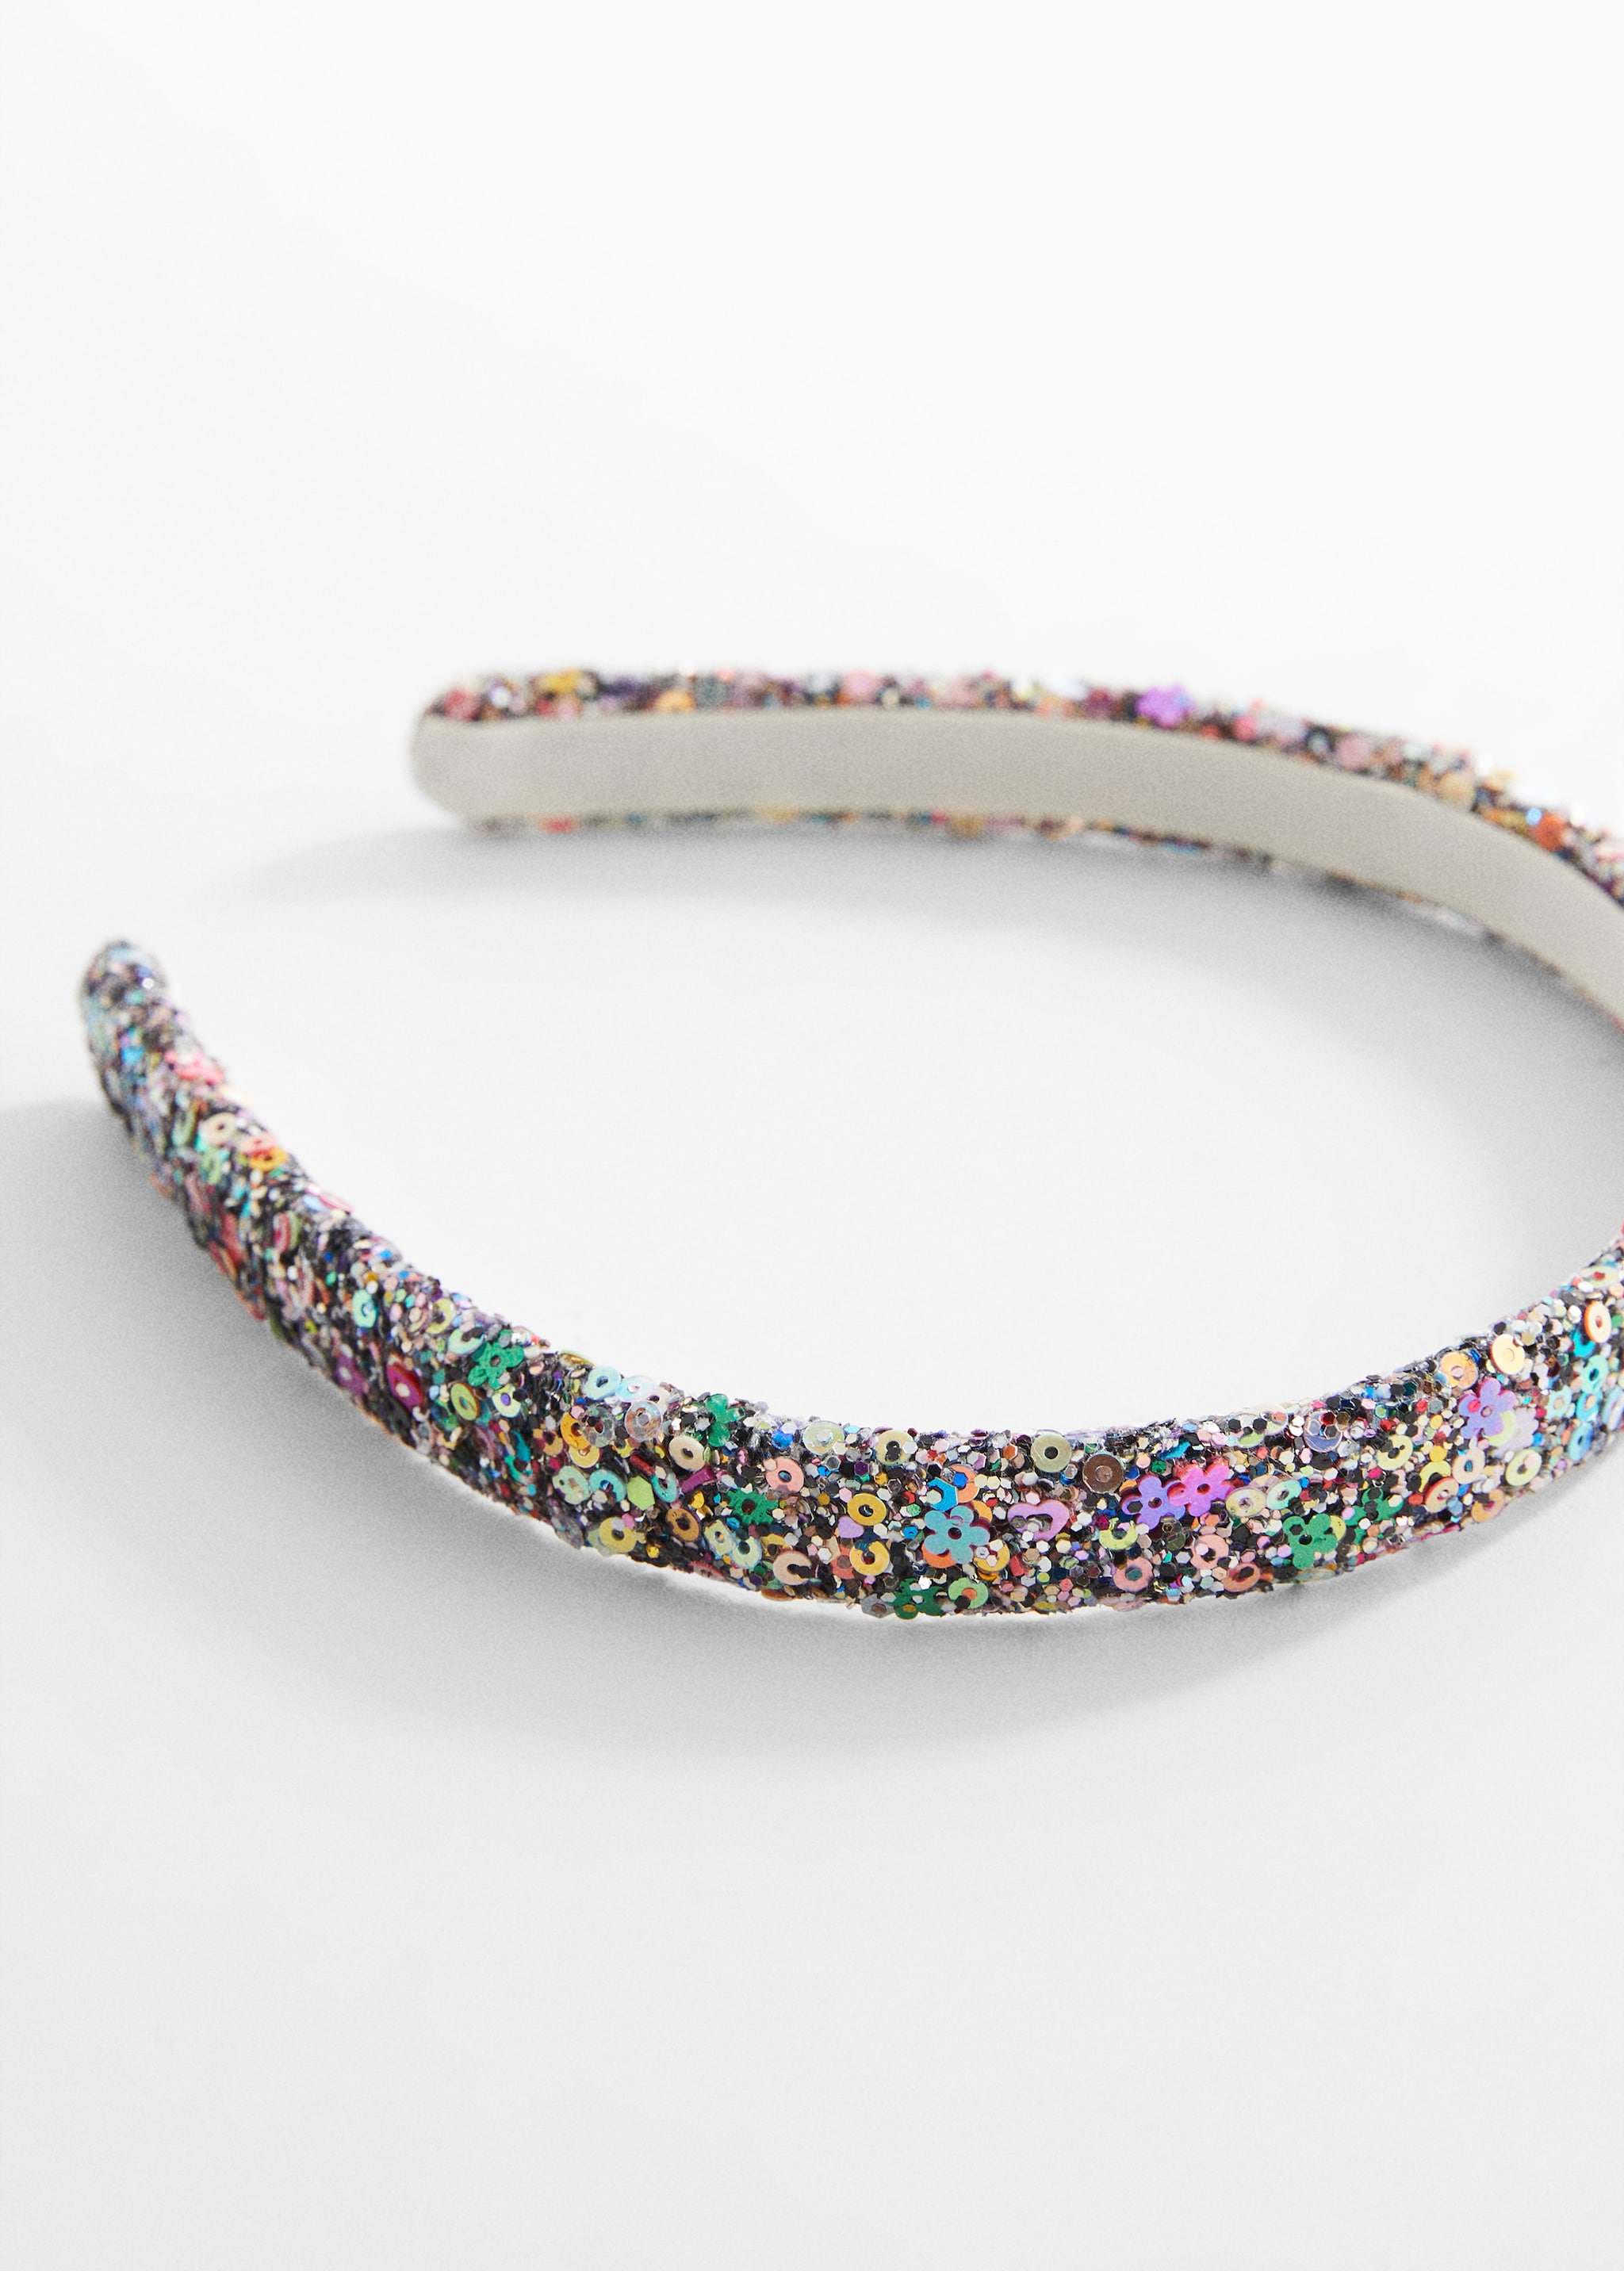 Sequins beads hairband - Details of the article 1